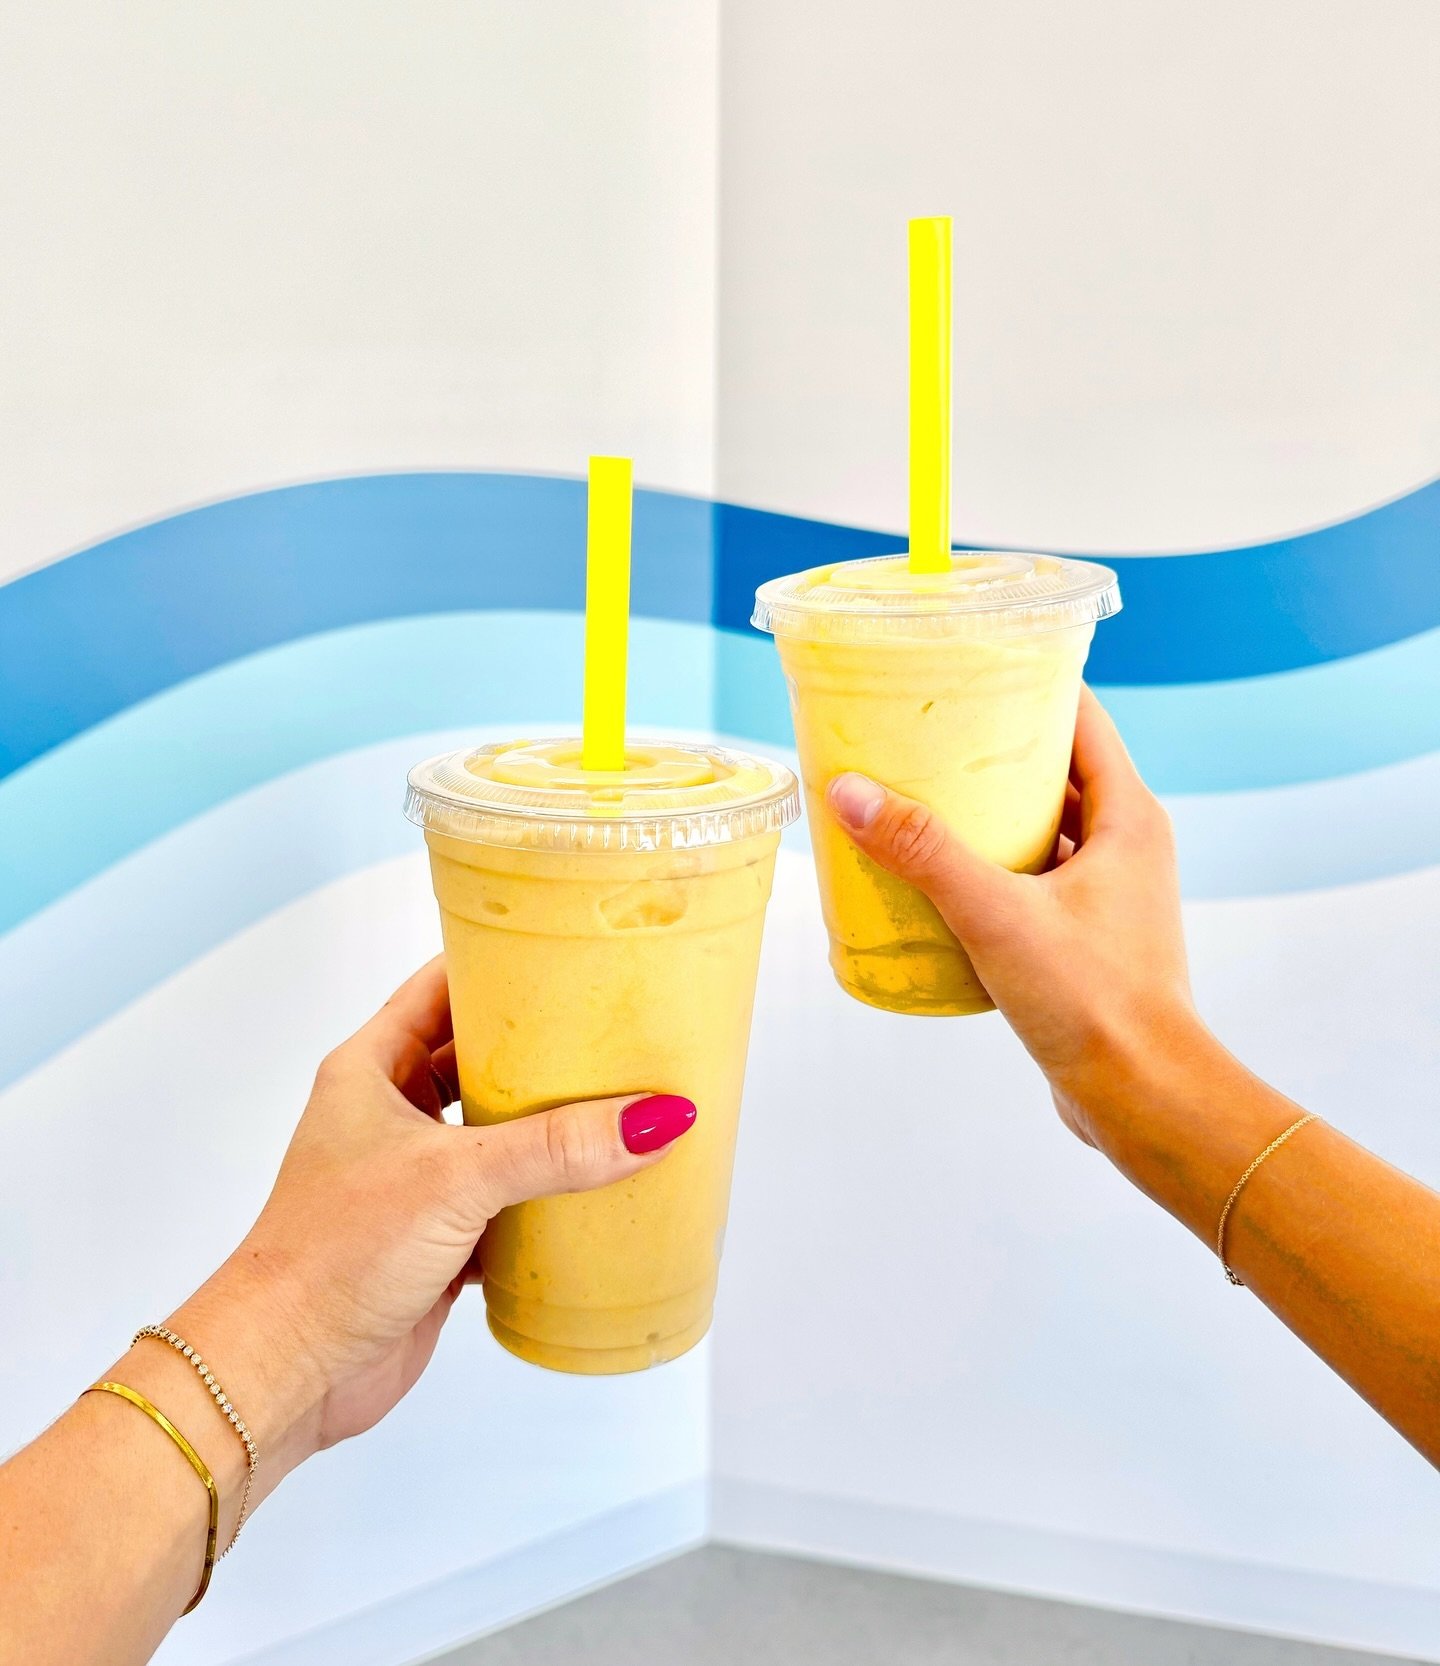 Our May smoothie special will transport you to a tropical paradise with just one sip. 🌴😎

What&rsquo;s in it?
🥭 mango
🍍 pineapple
🍌 banana 
💪 vanilla plant-based protein powder
🥥 coconut water

Also available for preorder on the Swell Studio a